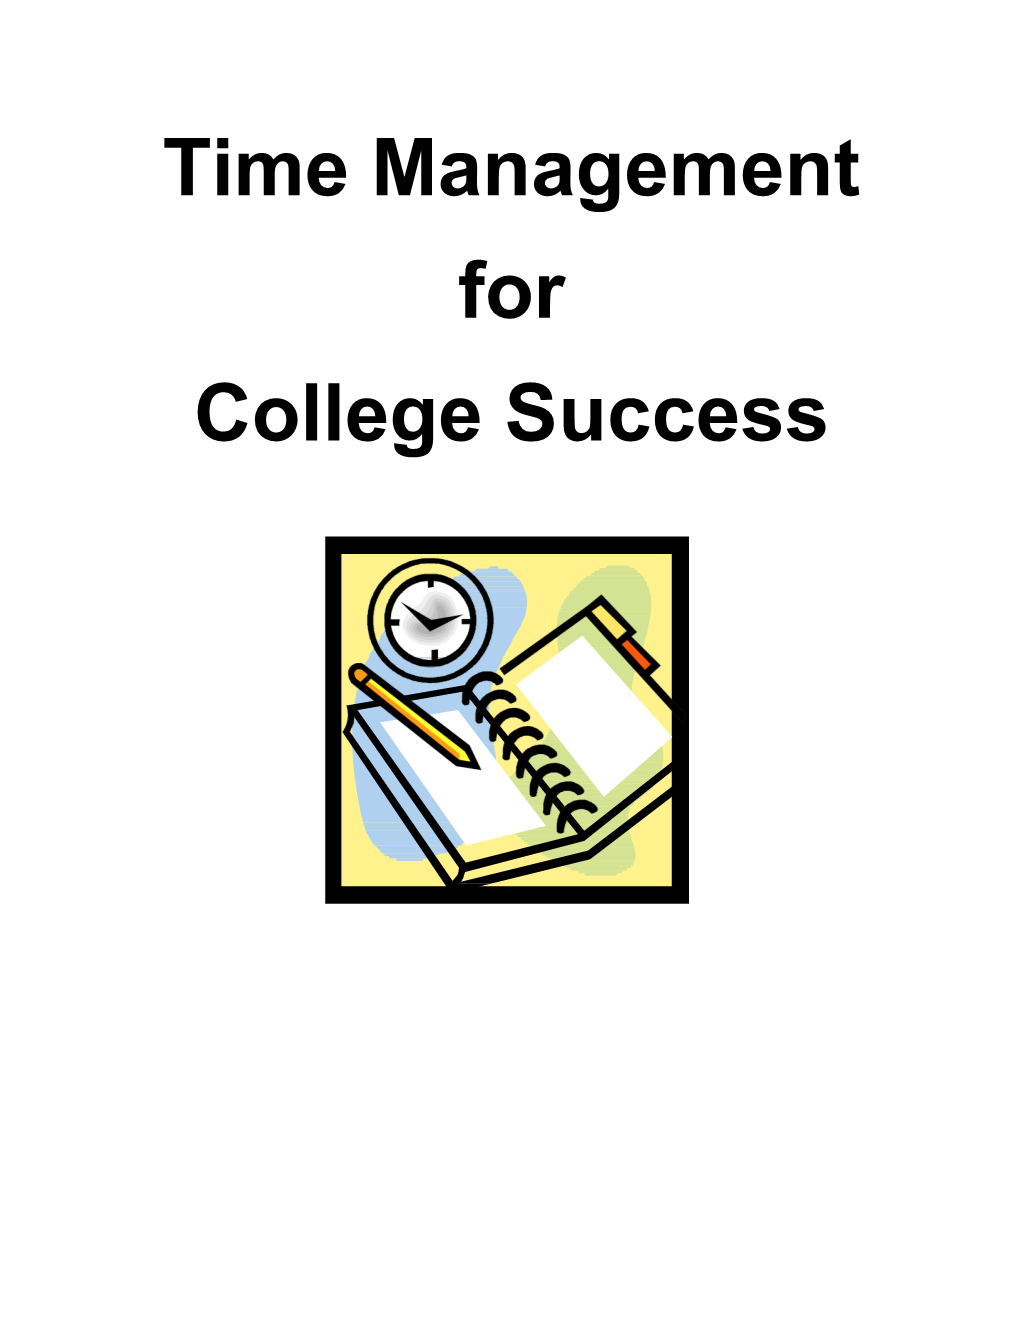 Time Management for College Success